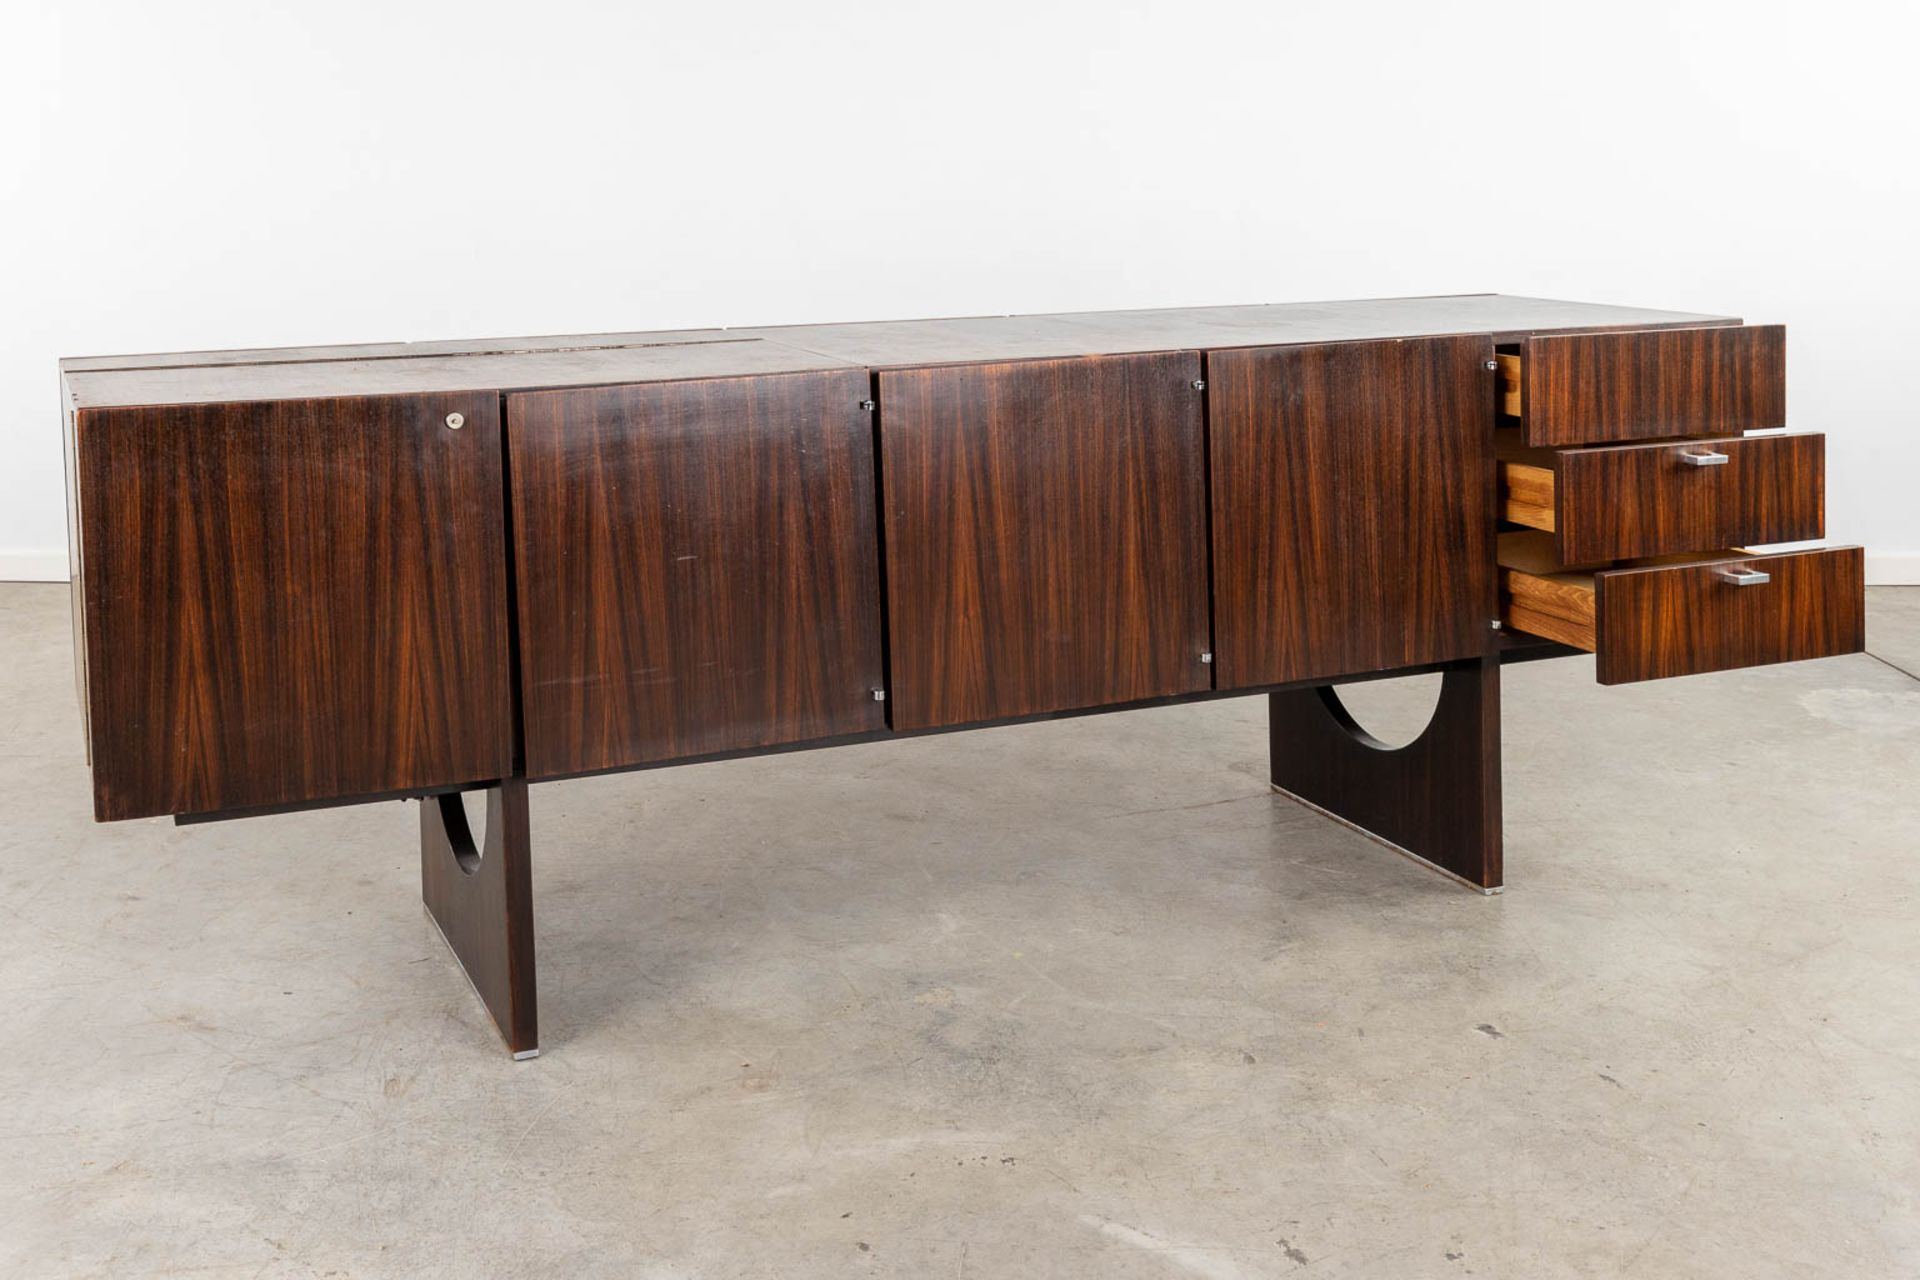 A mid-century sideboard with rosewood veneer, probably made by Decoene. (D:56 x W:225 x H:78 cm) - Image 4 of 19